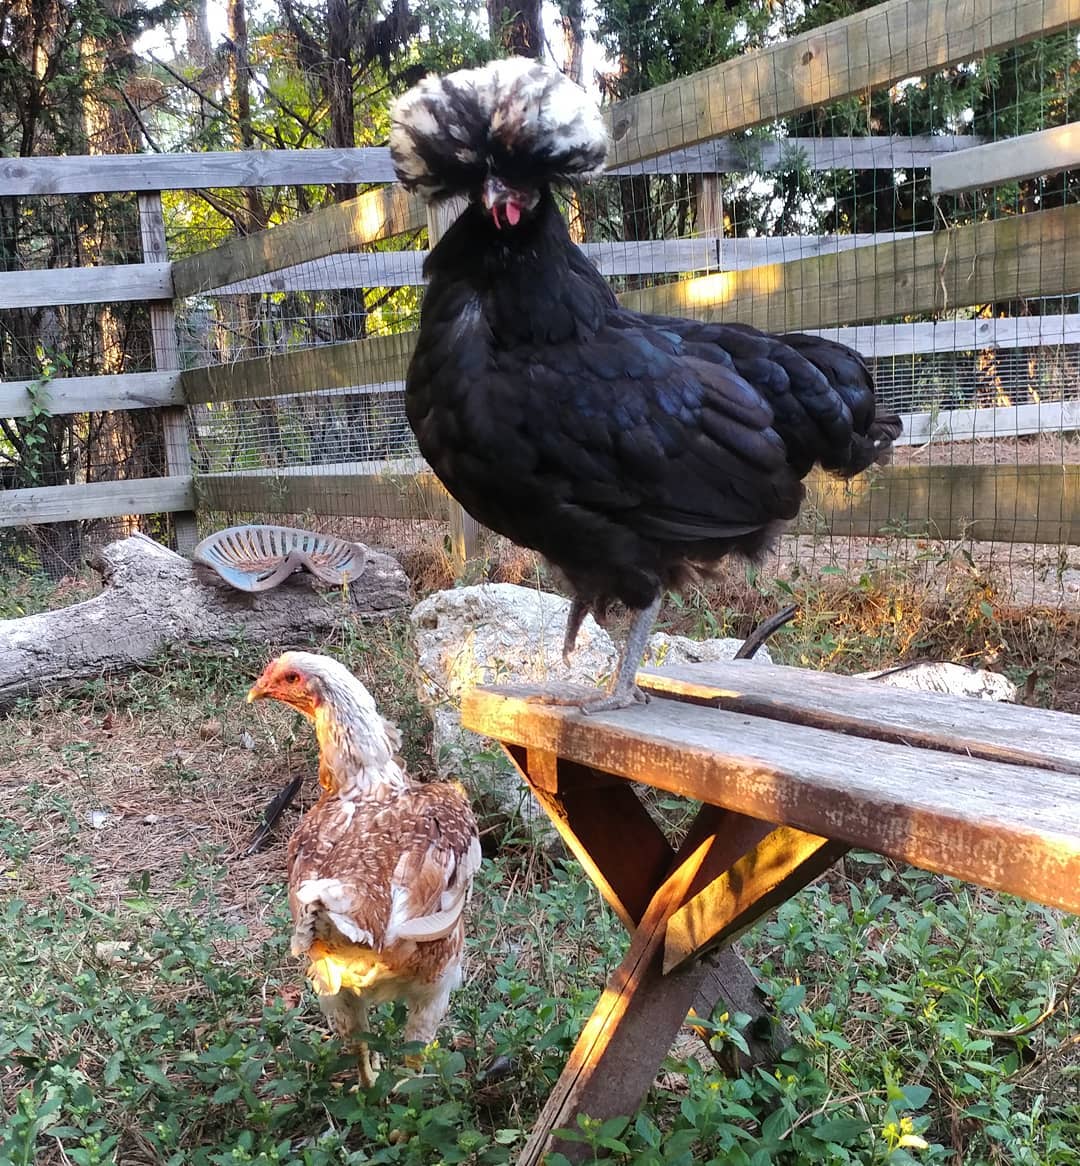 Kahlo knows I am following her around to get a picture with ZERO tail feathers and seems rather peeved about it. Bryce does not understand what I am doing but is generally psychotic about everything so keeps sprinting away and squawking even though I am not following her.